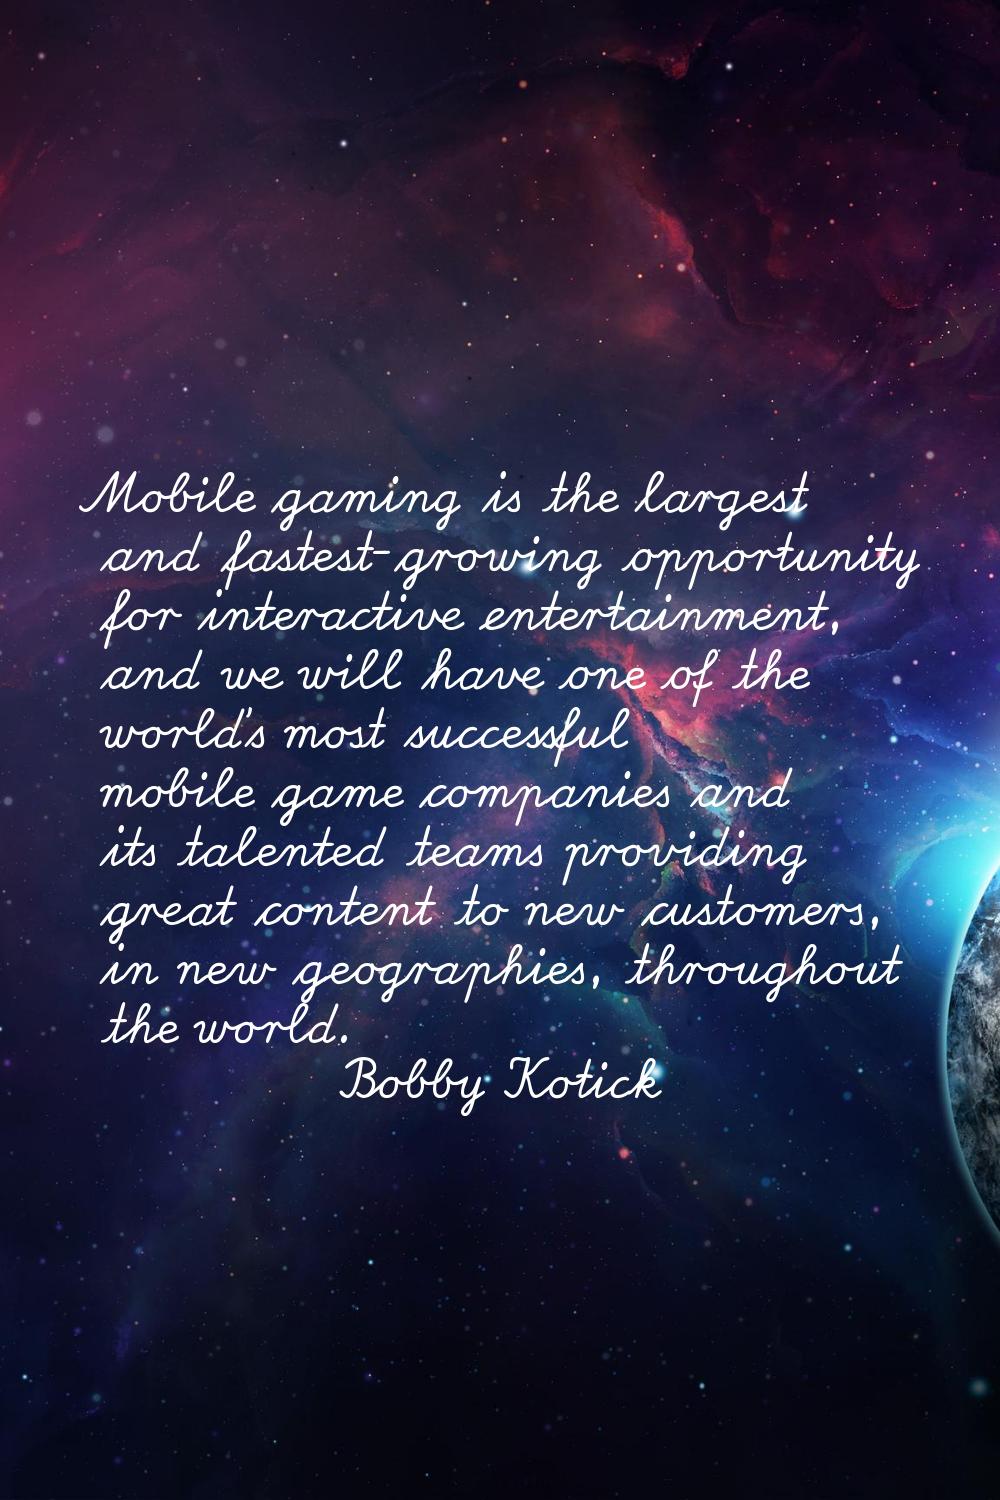 Mobile gaming is the largest and fastest-growing opportunity for interactive entertainment, and we 